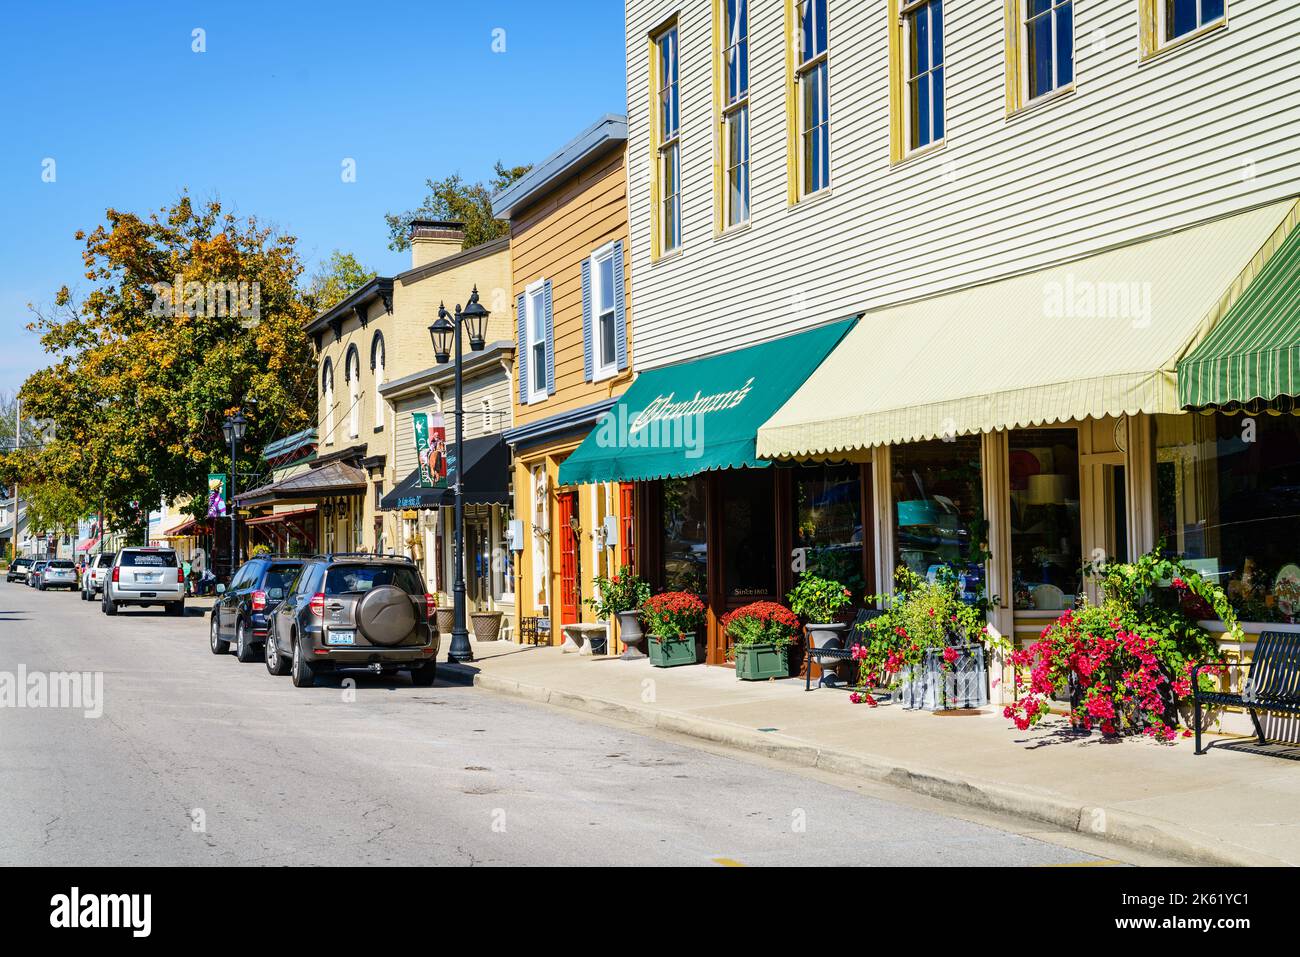 Midway, Kentucky, October 16, 2016: Main street of Midway - a small town in Central Kentucky famous of its boutique shops and restaurants Stock Photo